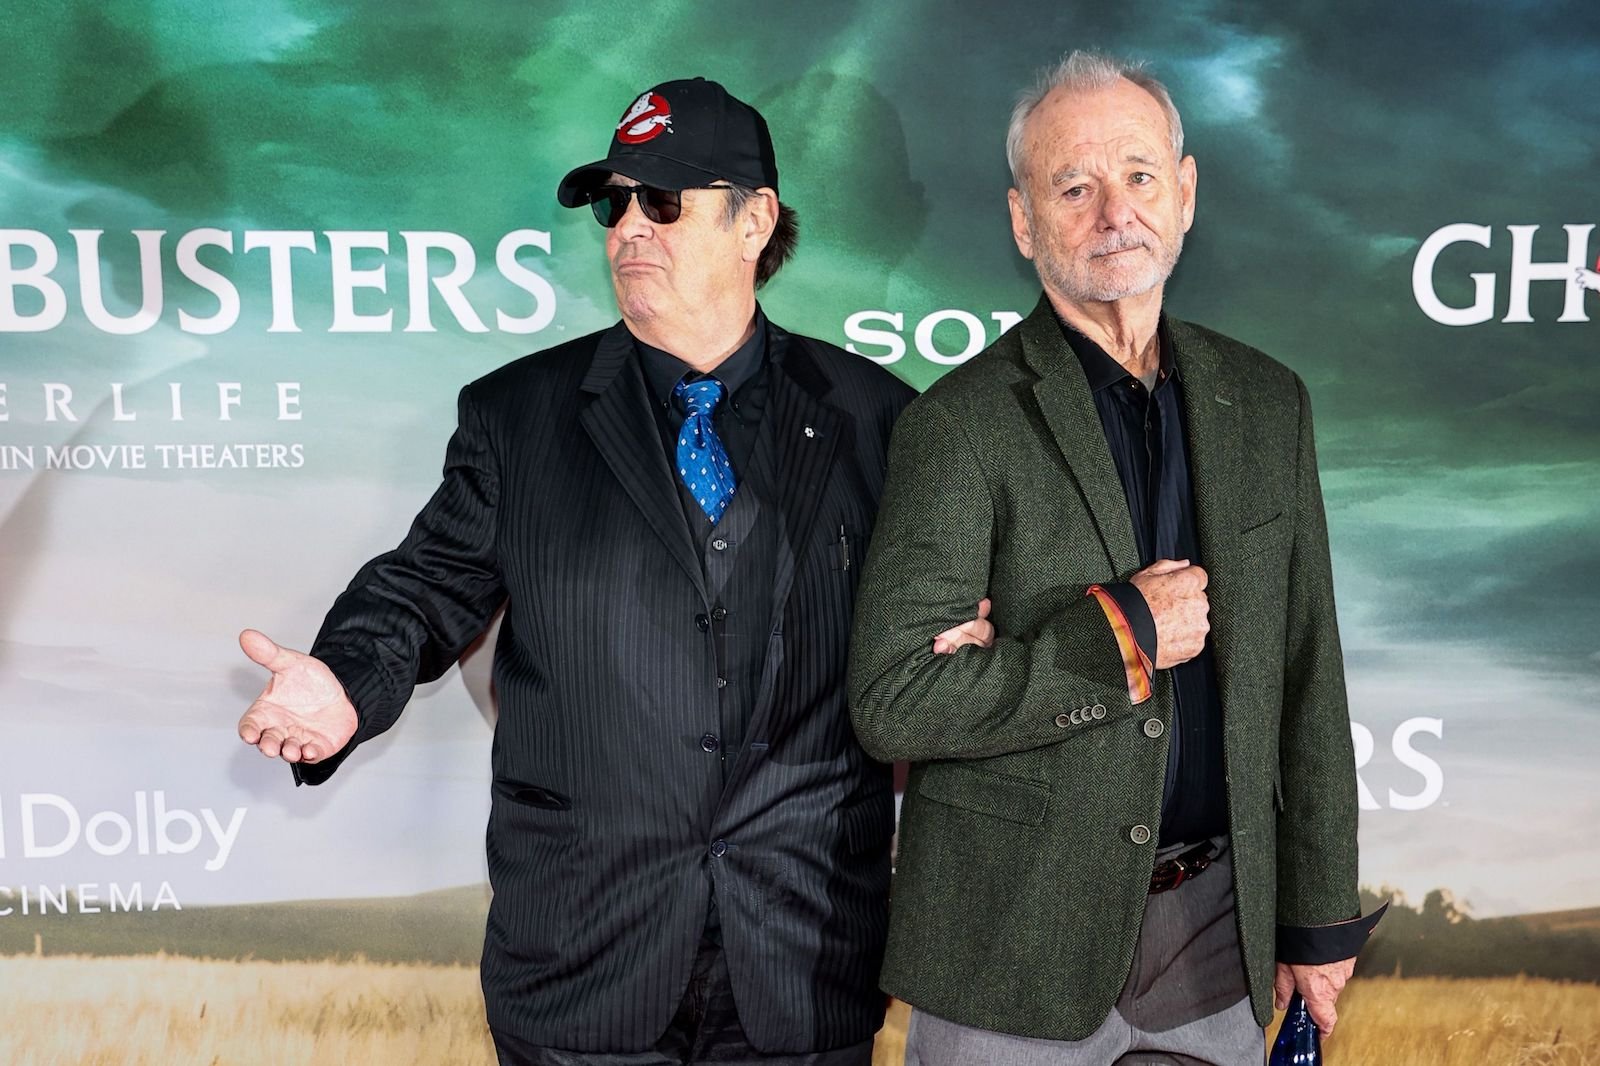 'Ghostbusters' stars Dan Aykroyd and Bill Murray met in Chicago wearing suits and standing arm in arm.